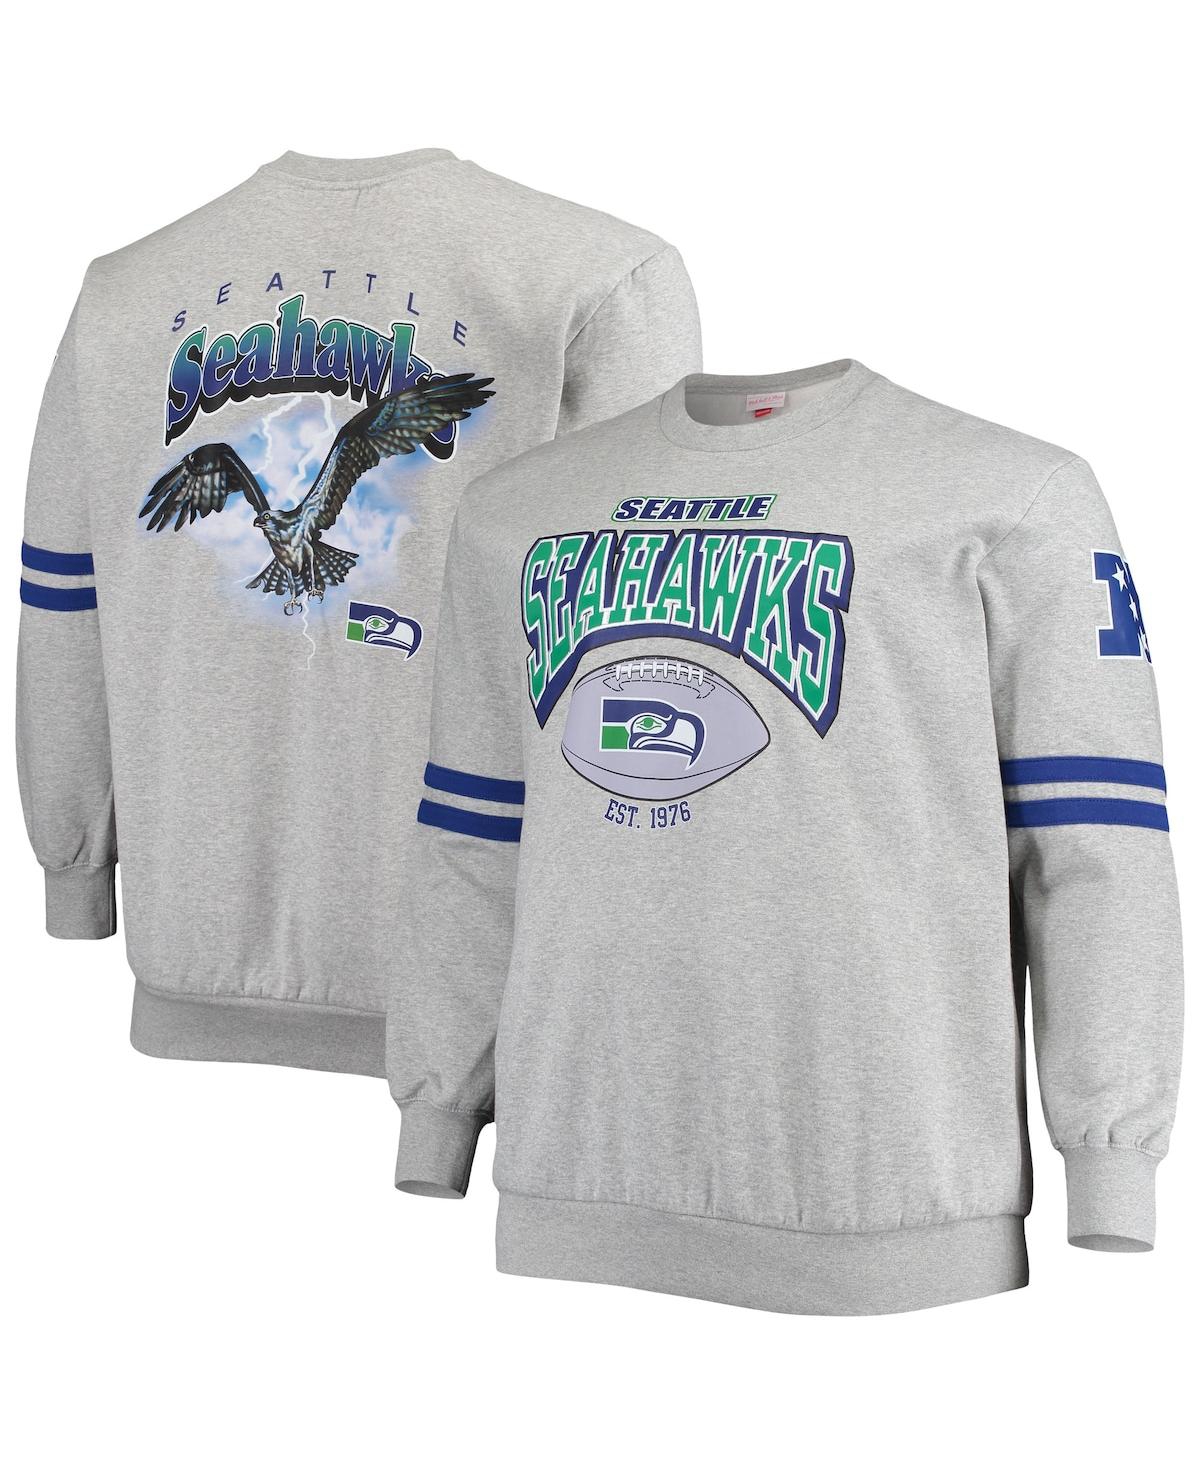 MITCHELL & NESS MEN'S MITCHELL & NESS HEATHER GRAY SEATTLE SEAHAWKS BIG AND TALL ALLOVER PRINT PULLOVER SWEATSHIRT